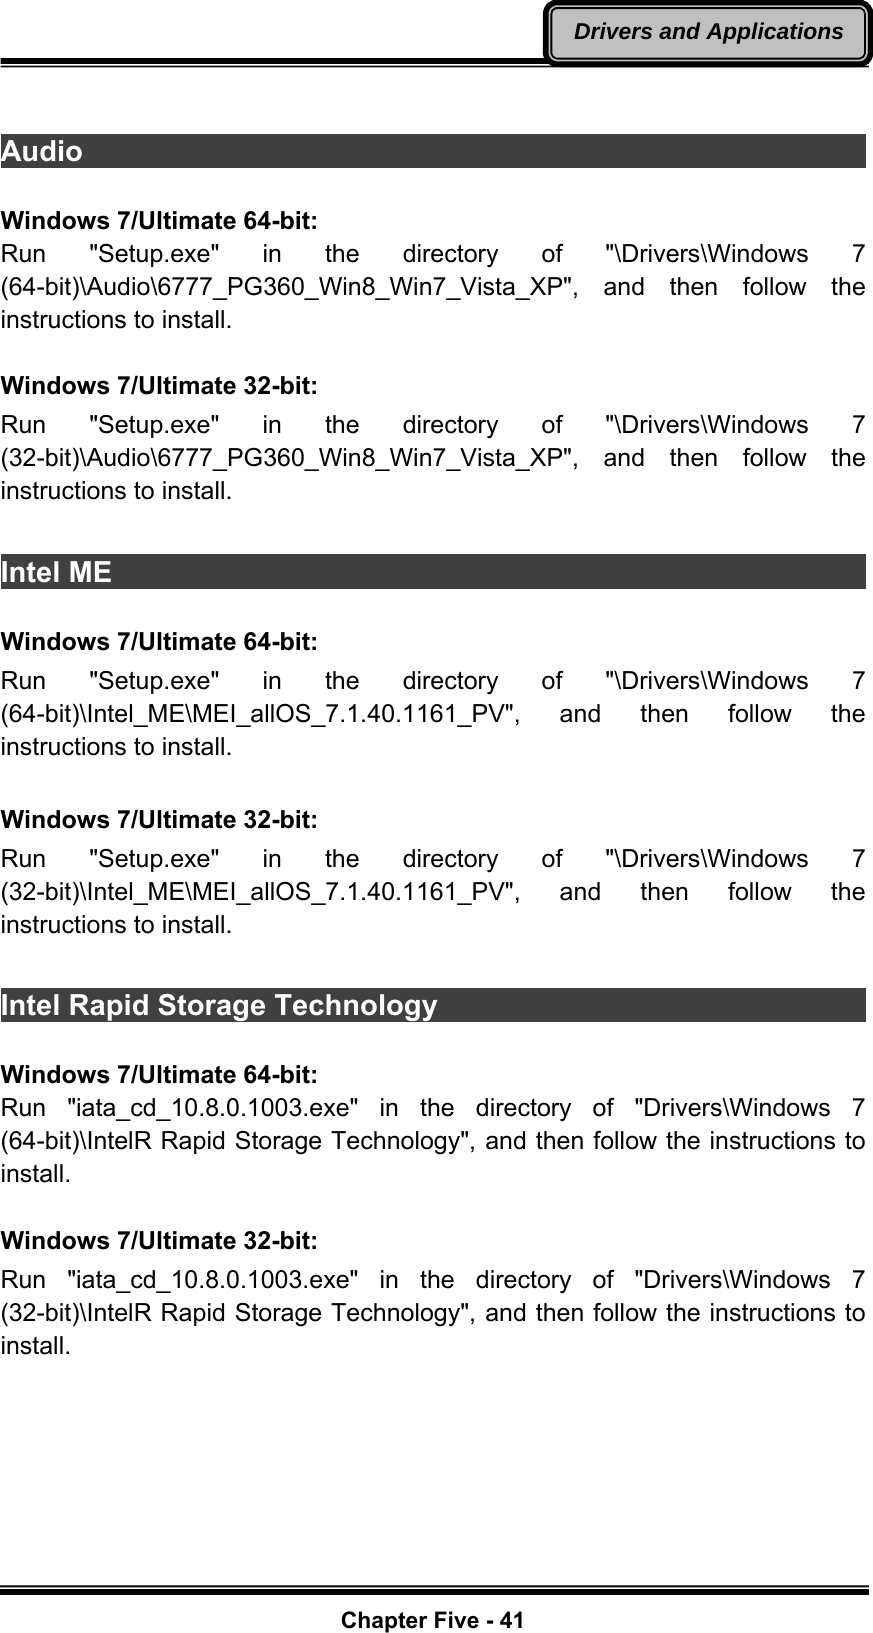   Chapter Five - 41Drivers and Applications Audio                                                                    Windows 7/Ultimate 64-bit: Run &quot;Setup.exe&quot; in the directory of &quot;\Drivers\Windows 7 (64-bit)\Audio\6777_PG360_Win8_Win7_Vista_XP&quot;, and then follow the instructions to install.  Windows 7/Ultimate 32-bit: Run &quot;Setup.exe&quot; in the directory of &quot;\Drivers\Windows 7 (32-bit)\Audio\6777_PG360_Win8_Win7_Vista_XP&quot;, and then follow the instructions to install.    Intel ME                                                                  Windows 7/Ultimate 64-bit: Run &quot;Setup.exe&quot; in the directory of &quot;\Drivers\Windows 7 (64-bit)\Intel_ME\MEI_allOS_7.1.40.1161_PV&quot;, and then follow the instructions to install.  Windows 7/Ultimate 32-bit: Run &quot;Setup.exe&quot; in the directory of &quot;\Drivers\Windows 7 (32-bit)\Intel_ME\MEI_allOS_7.1.40.1161_PV&quot;, and then follow the instructions to install.  Intel Rapid Storage Technology                                Windows 7/Ultimate 64-bit: Run &quot;iata_cd_10.8.0.1003.exe&quot; in the directory of &quot;Drivers\Windows 7 (64-bit)\IntelR Rapid Storage Technology&quot;, and then follow the instructions to install.  Windows 7/Ultimate 32-bit: Run &quot;iata_cd_10.8.0.1003.exe&quot; in the directory of &quot;Drivers\Windows 7 (32-bit)\IntelR Rapid Storage Technology&quot;, and then follow the instructions to install. 